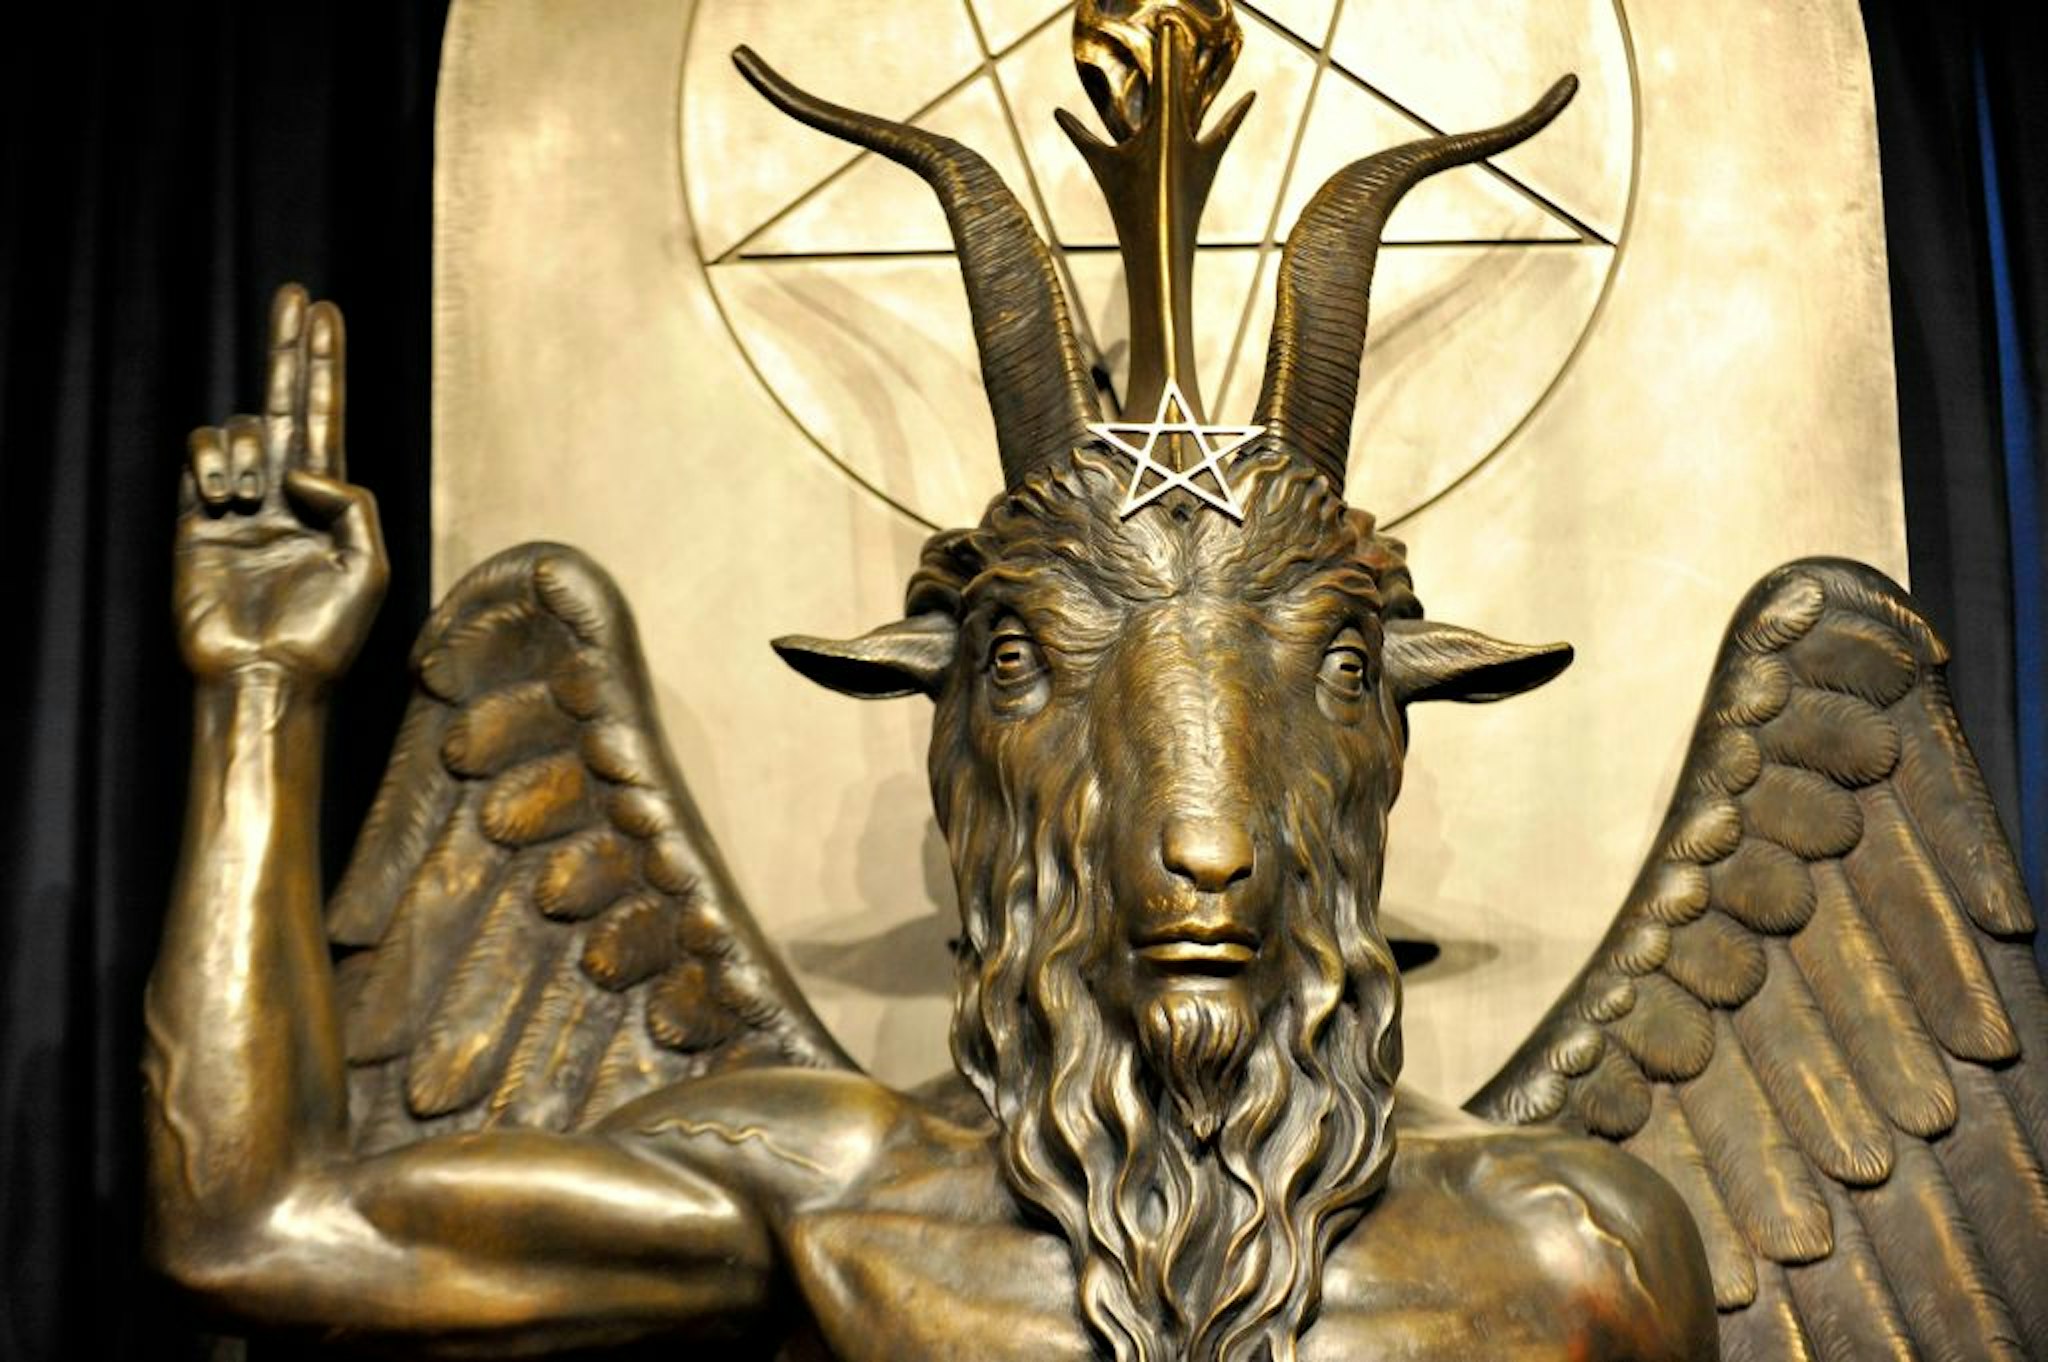 The Baphomet statue is seen in the conversion room at the Satanic Temple where a "Hell House" is being held in Salem, Massachusett on October 8, 2019. - The Hell House was a parody on a Christian Conversion centre meant to scare atheist and other Satanic Church members. (Photo by Joseph Prezioso / AFP) (Photo by JOSEPH PREZIOSO/AFP via Getty Images)